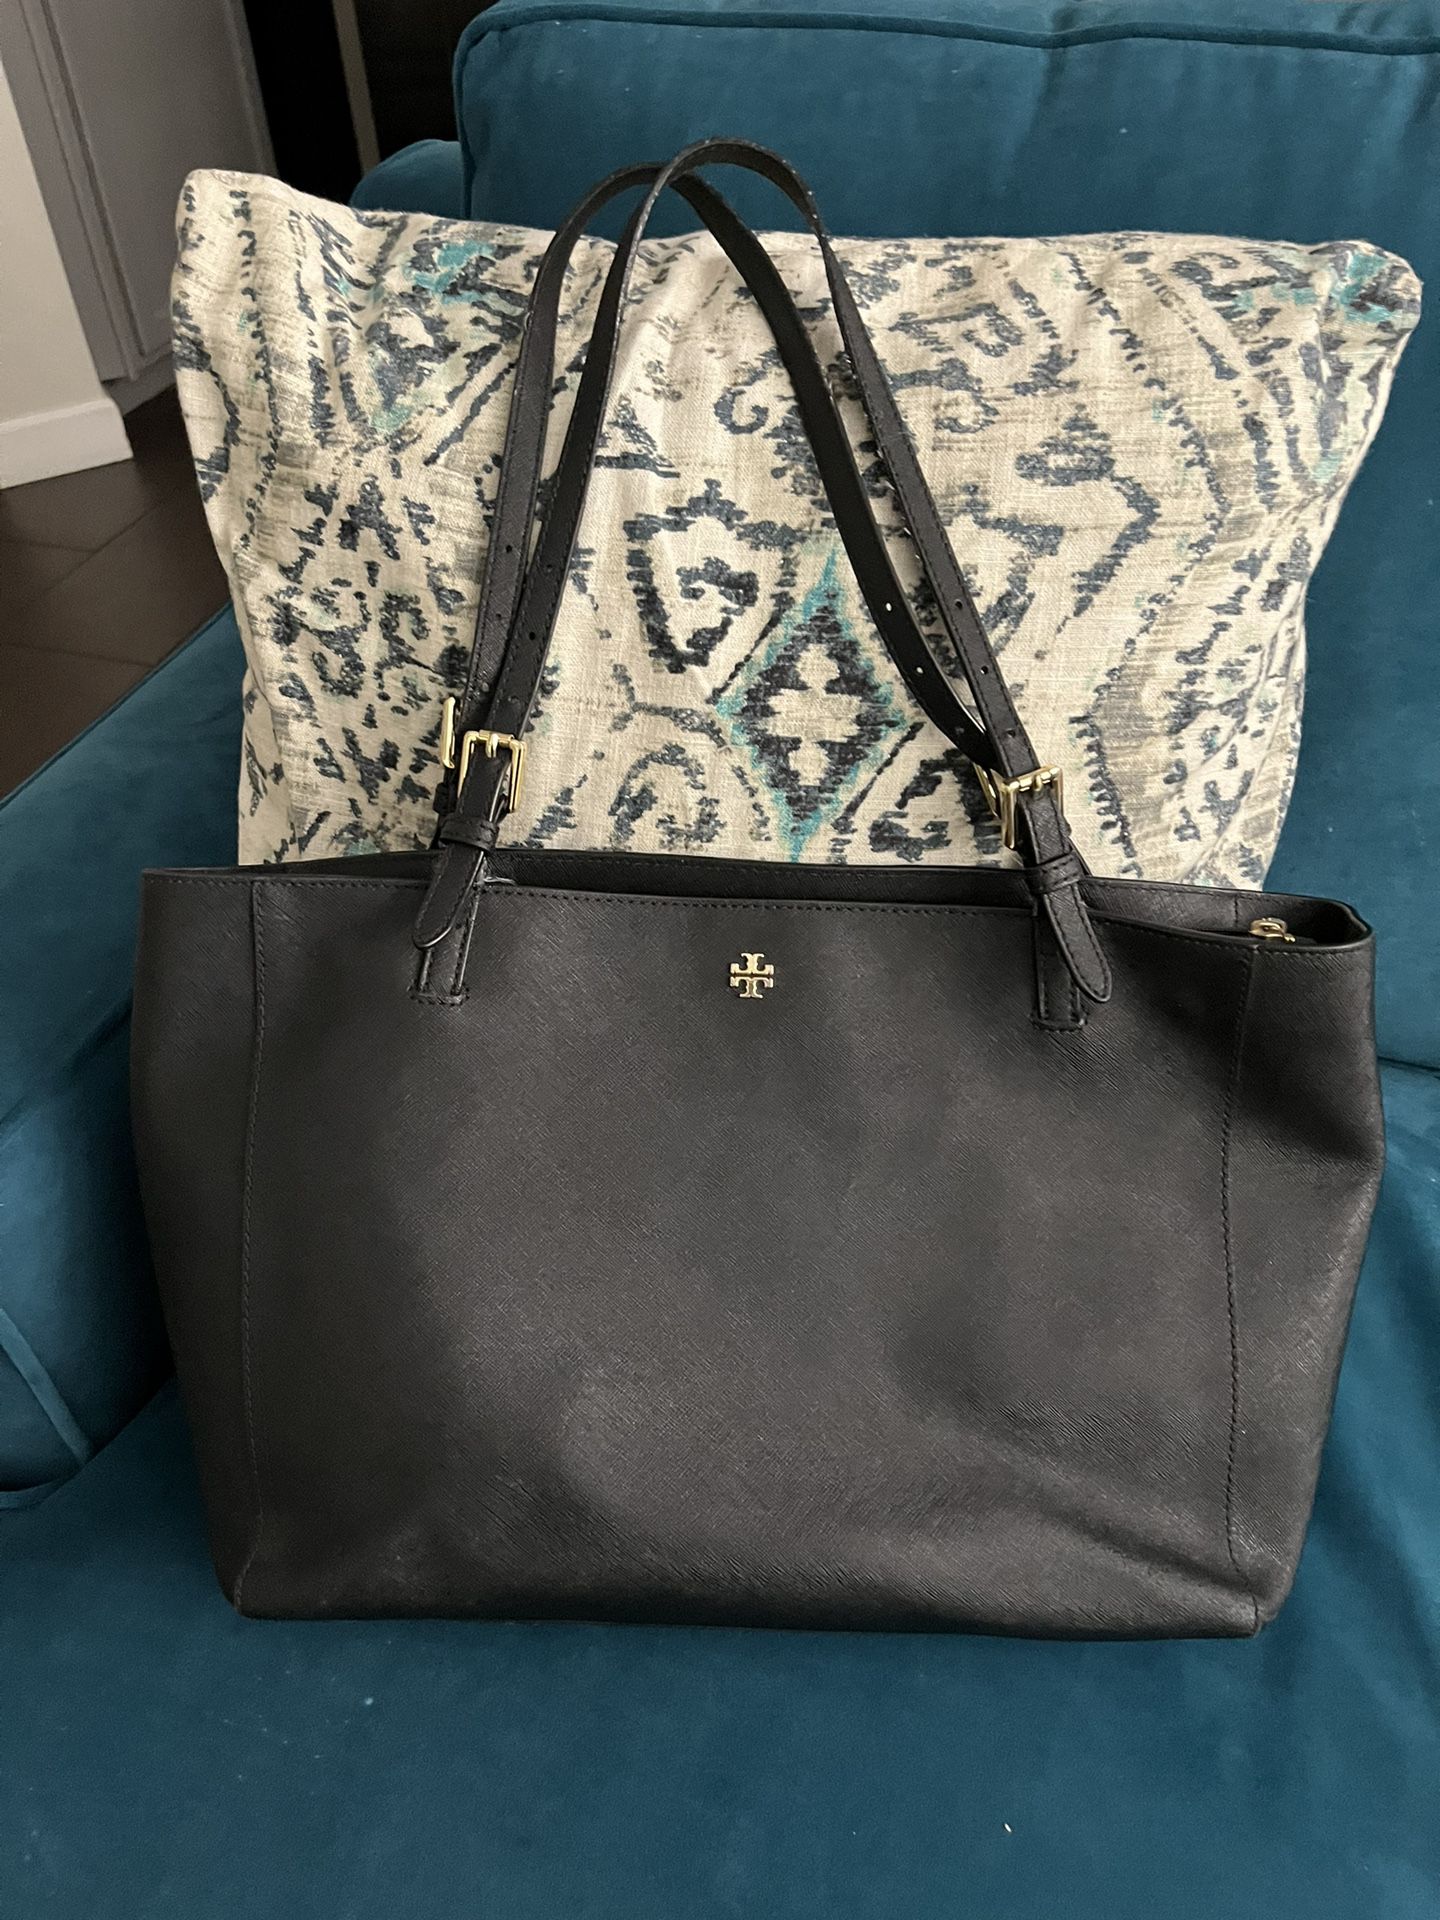 Tory Burch Black Bag Great For Work/Travel/ Everyday for Sale in